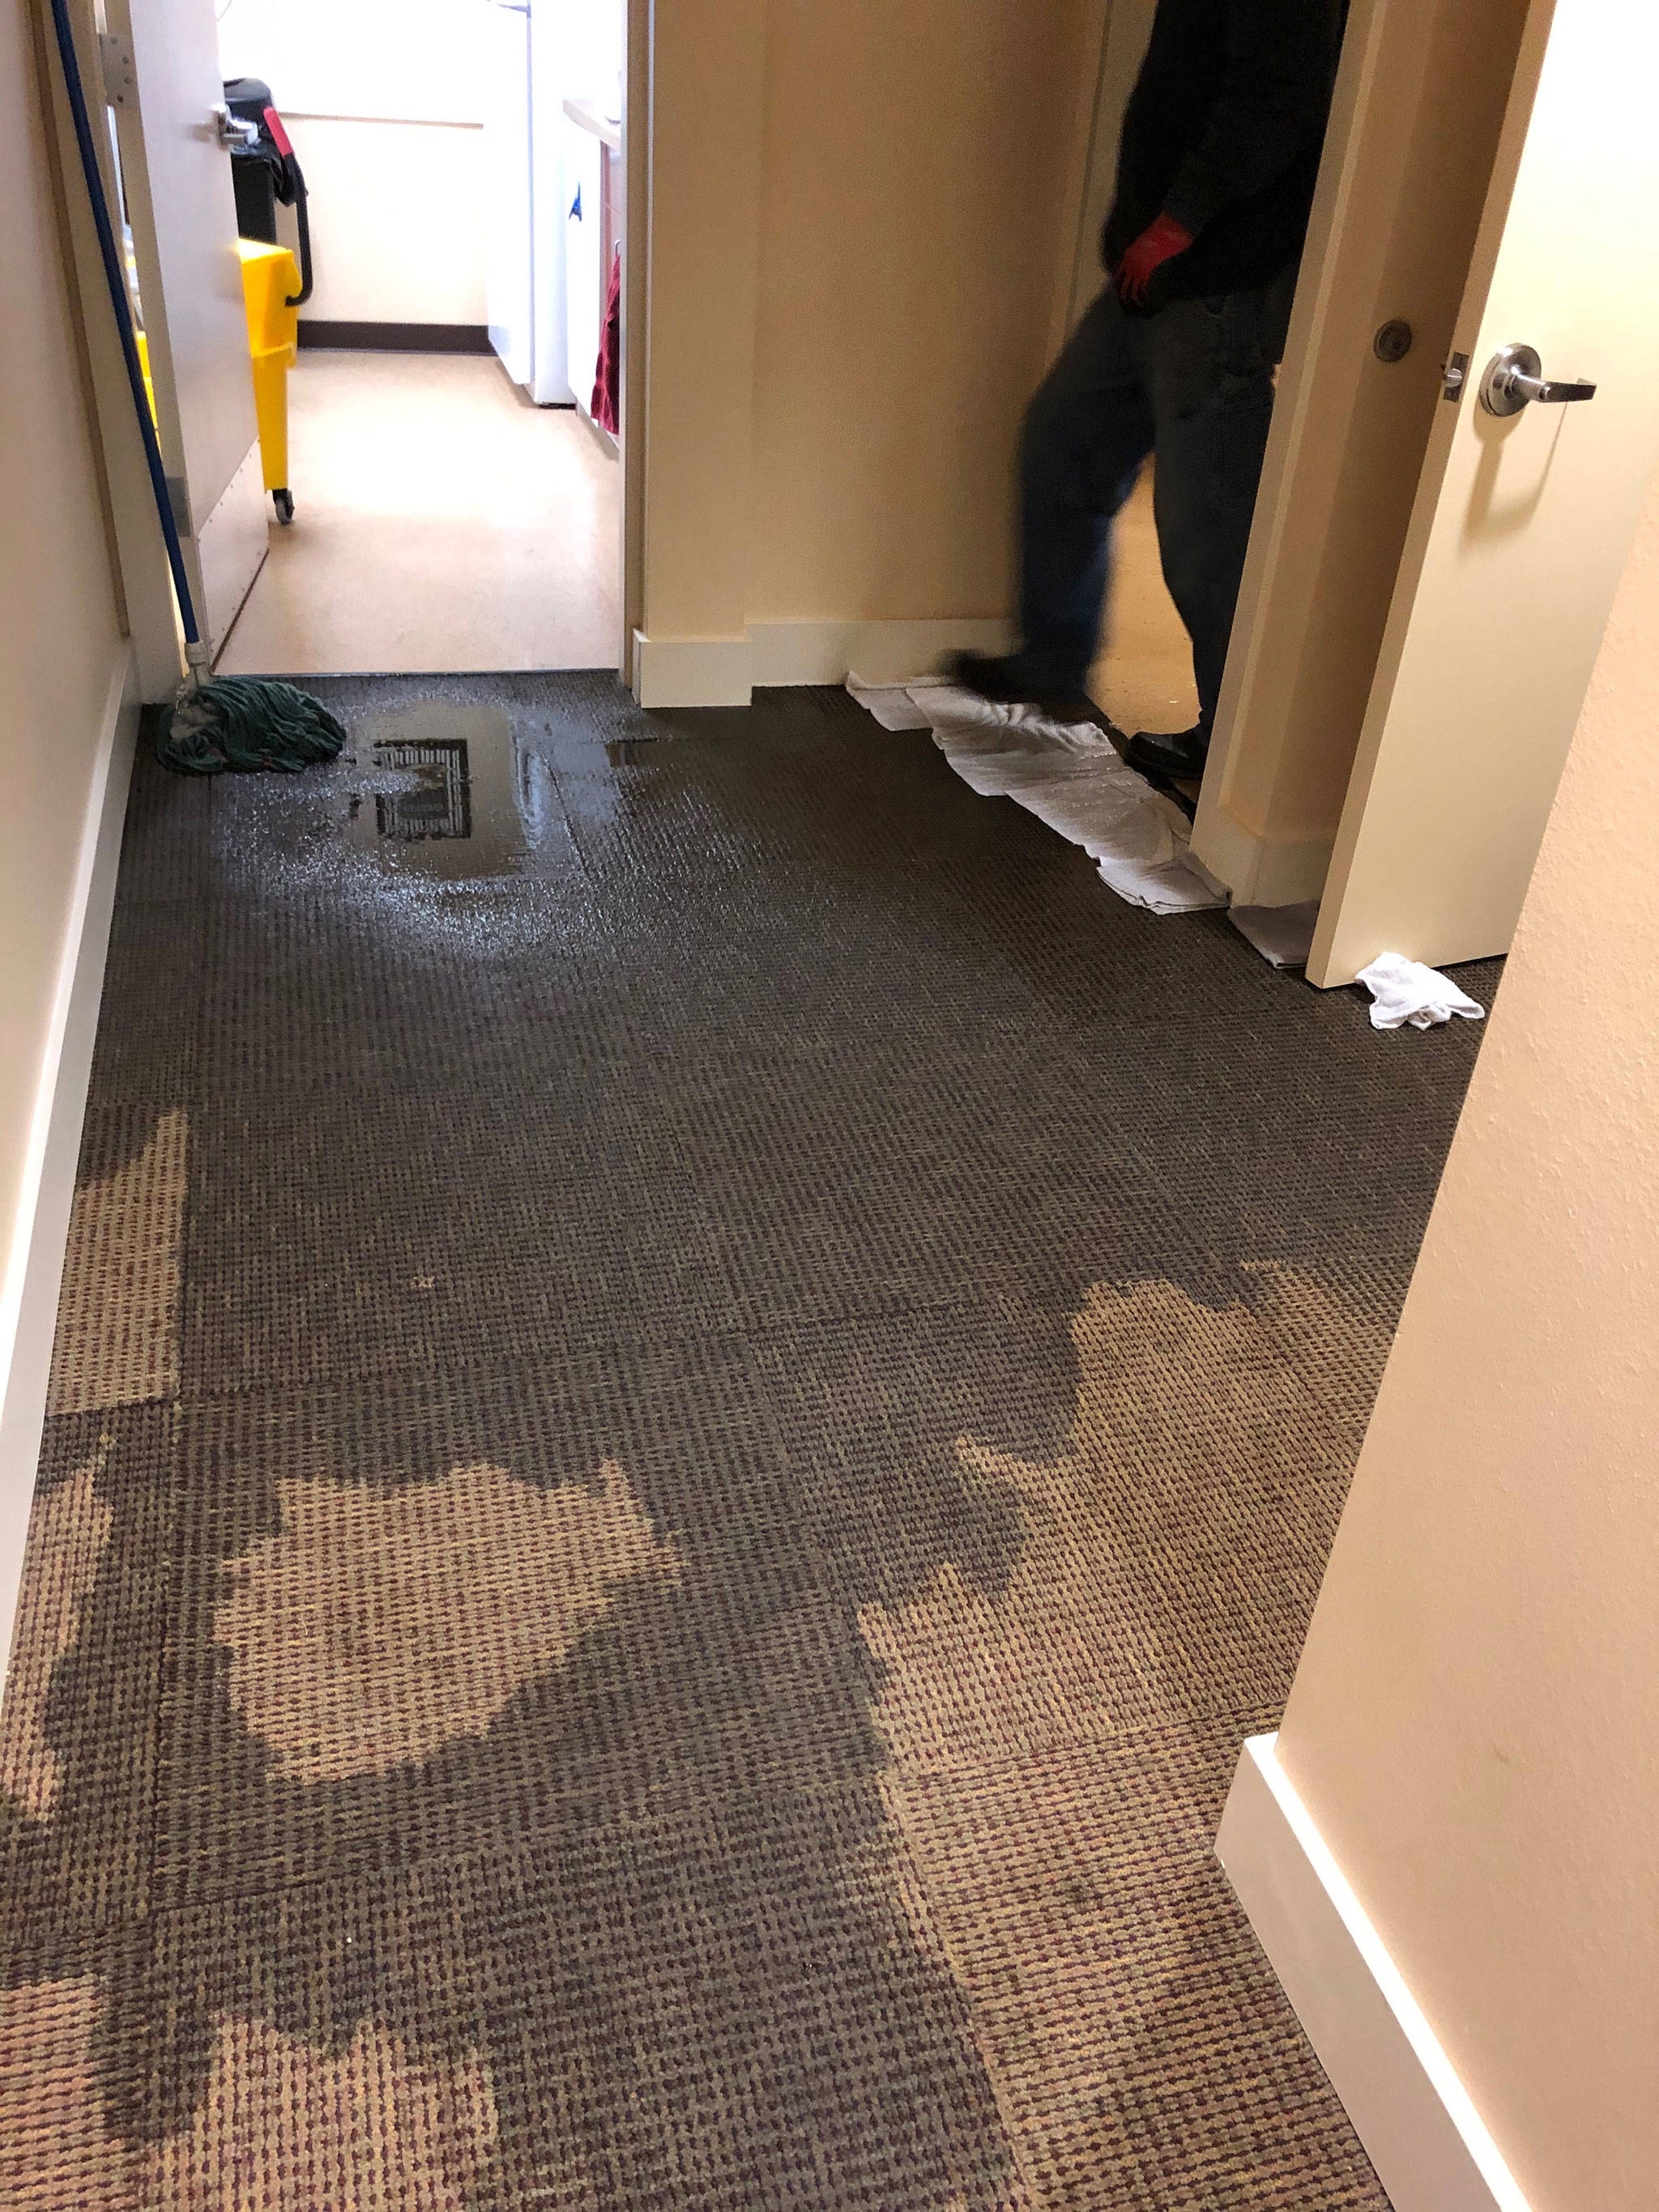 Despite flooding on Dec. 7 to Sequim’s Sound Community Bank, staff said the branch was able to operate its ATM and drive-through. However, the branch closed on Dec. 20 due to power being shut off after water damaged the building’s electrical system. Photo courtesy of Sound Community Bank